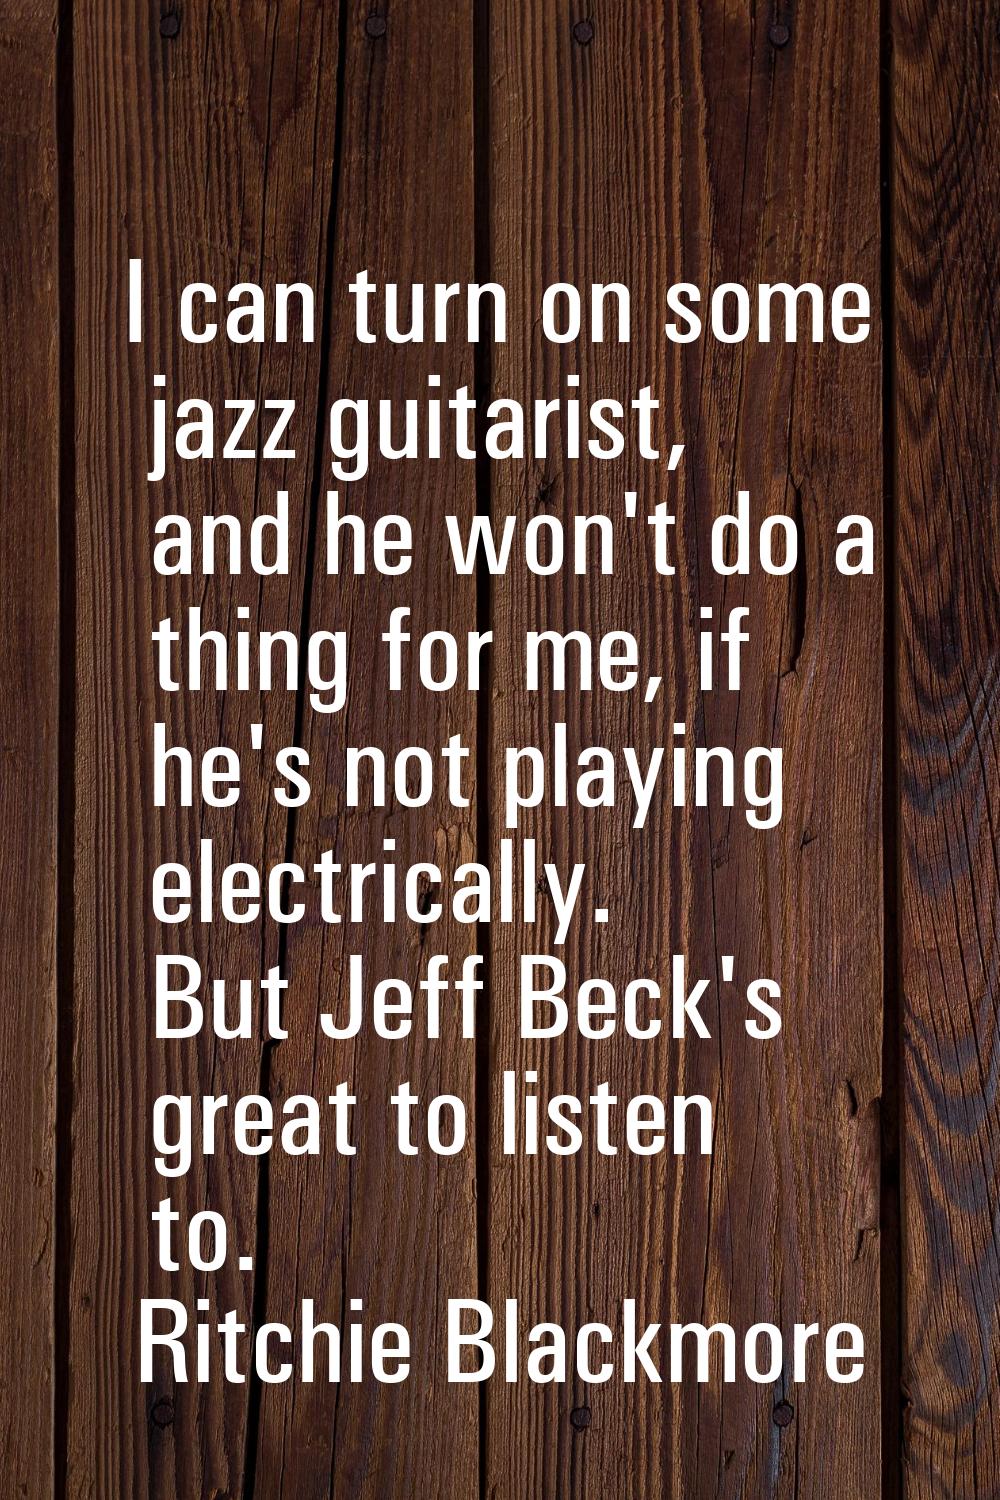 I can turn on some jazz guitarist, and he won't do a thing for me, if he's not playing electrically